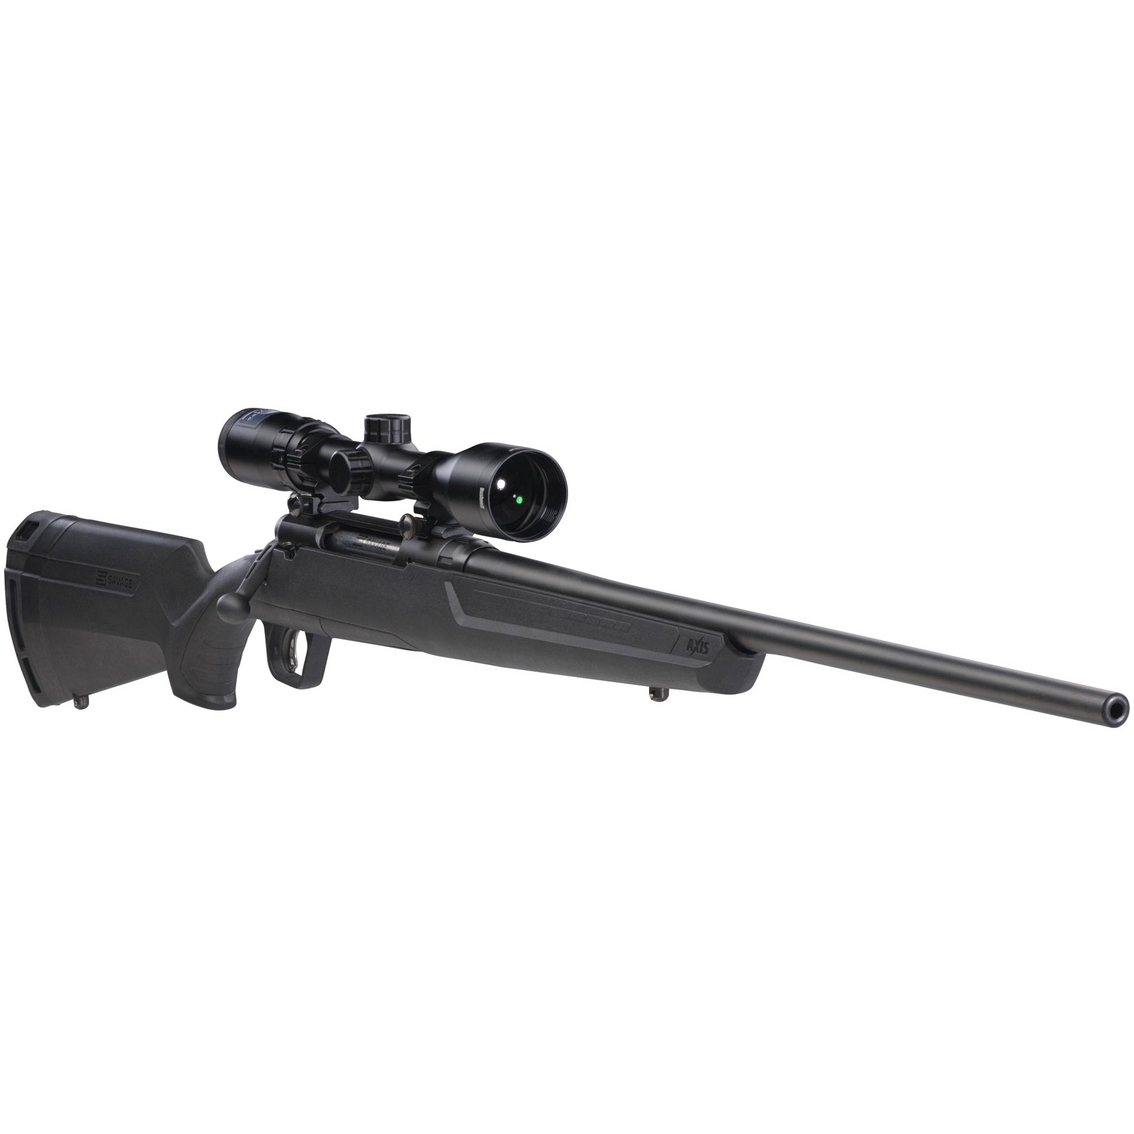 Savage Axis II XP Combo 7MM-08 22 in. Barrel 4 Rds Rifle Black with Bushnell Scope - Image 3 of 3